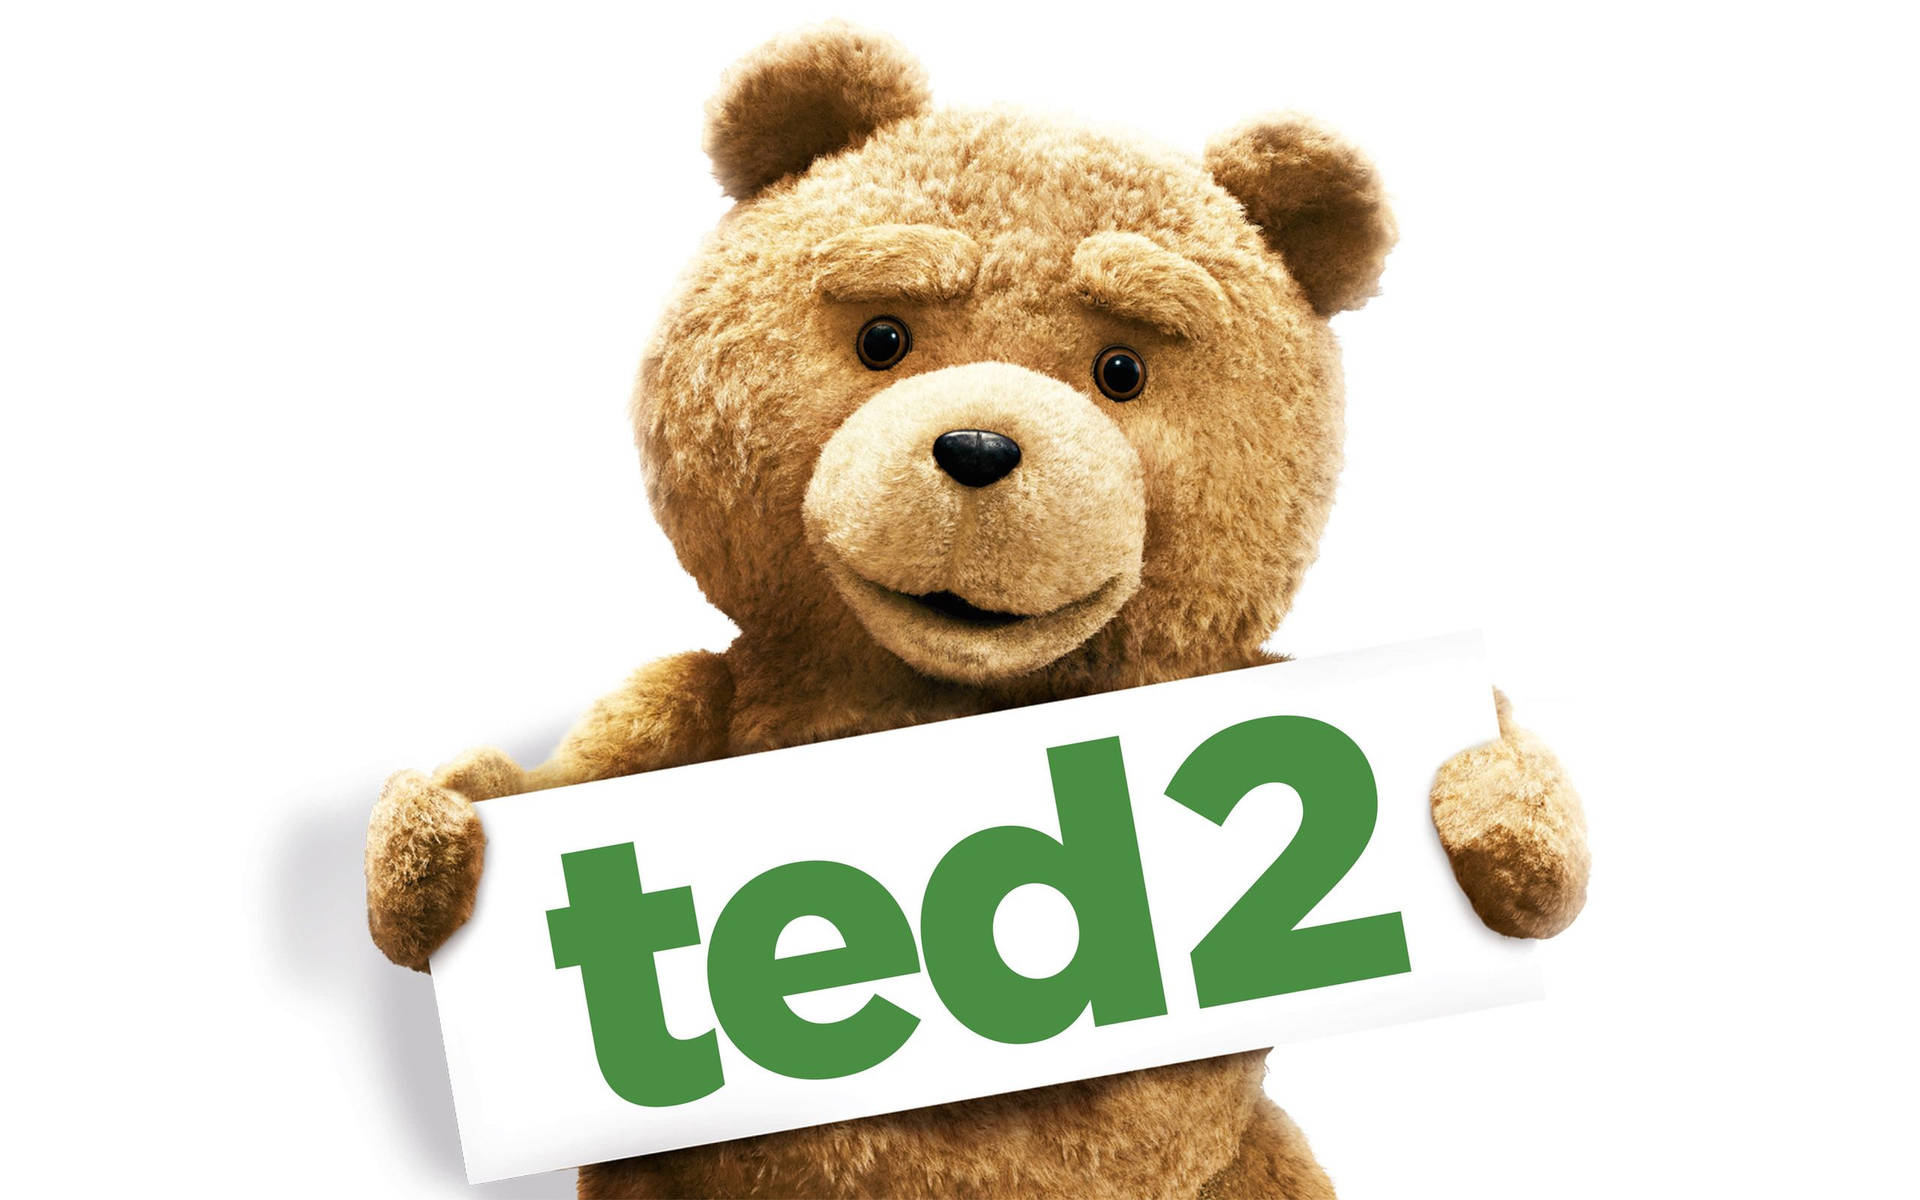 Ted Shows Ted 2